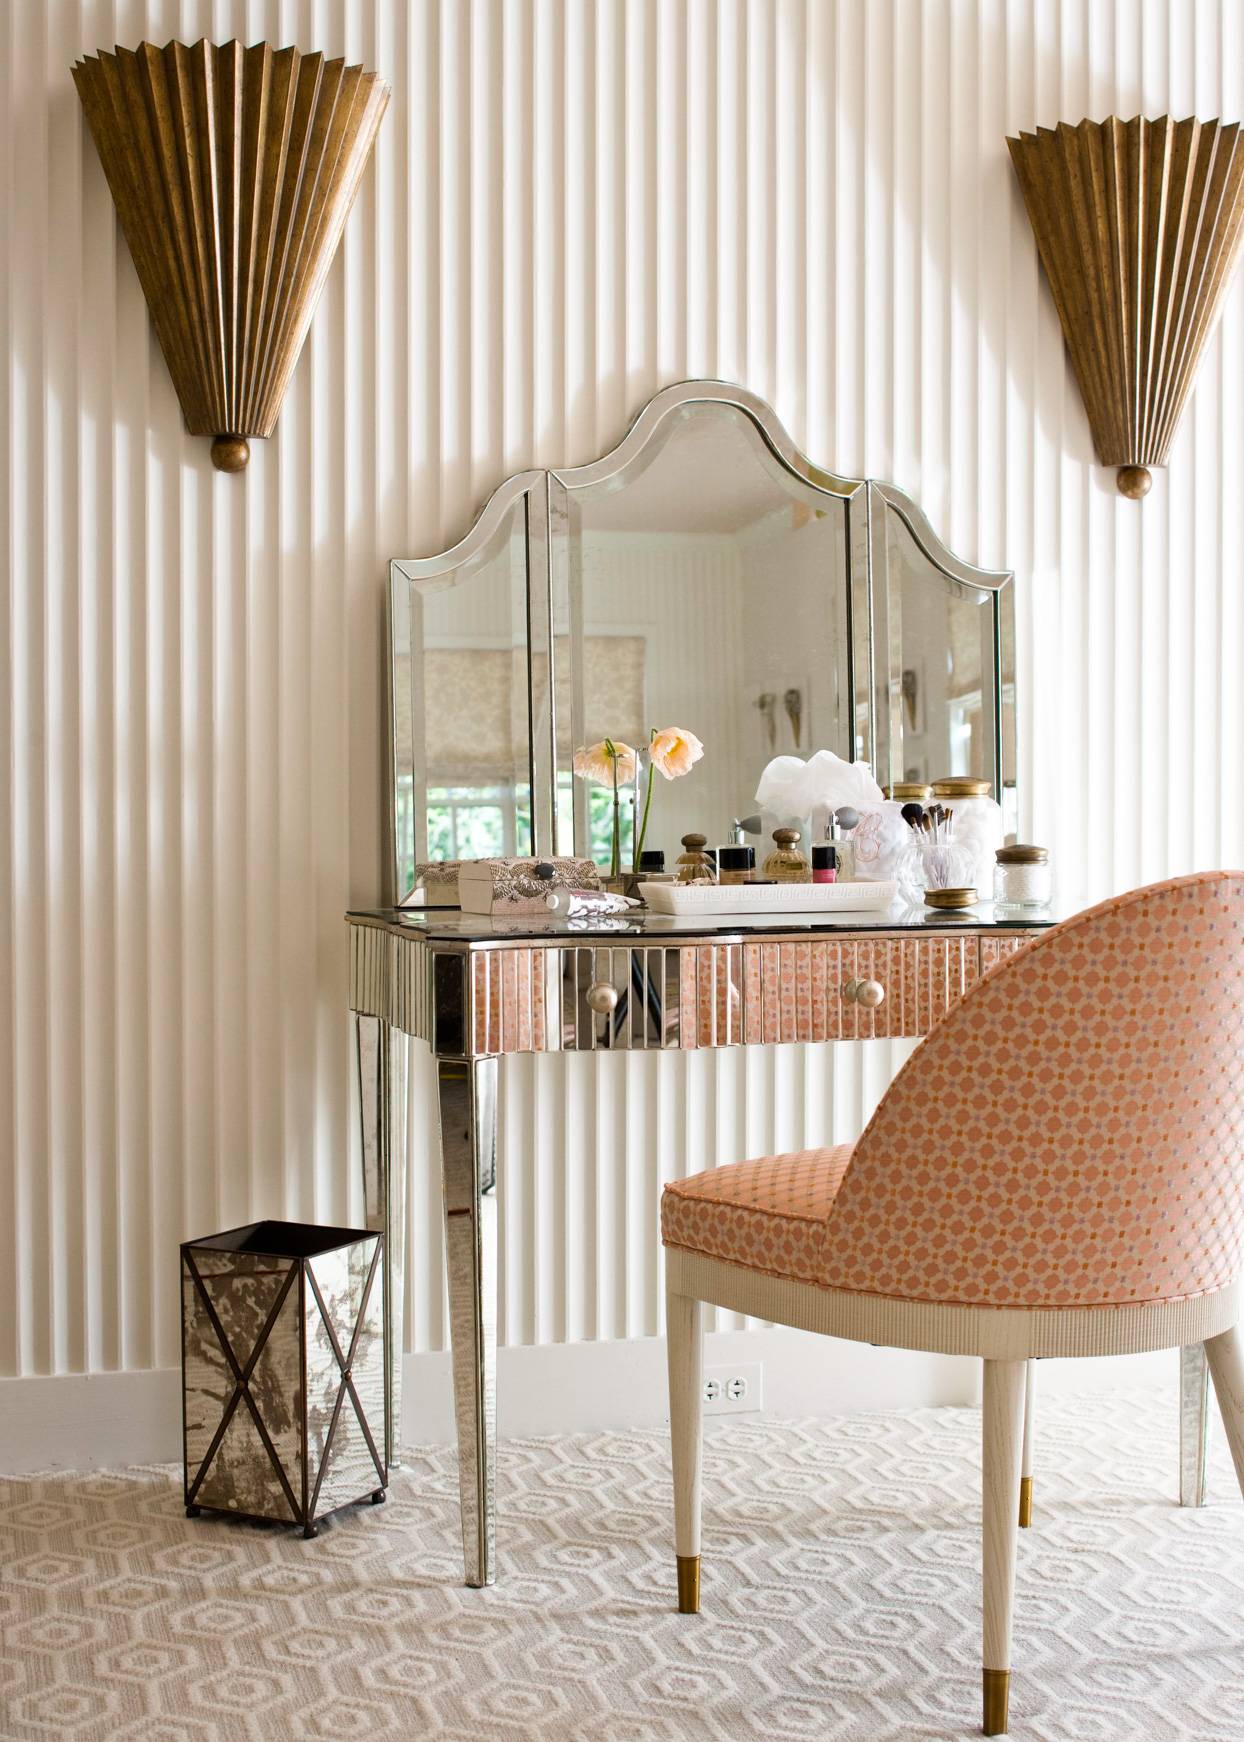 Framed mirrors are a must for art deco design (from BHG)